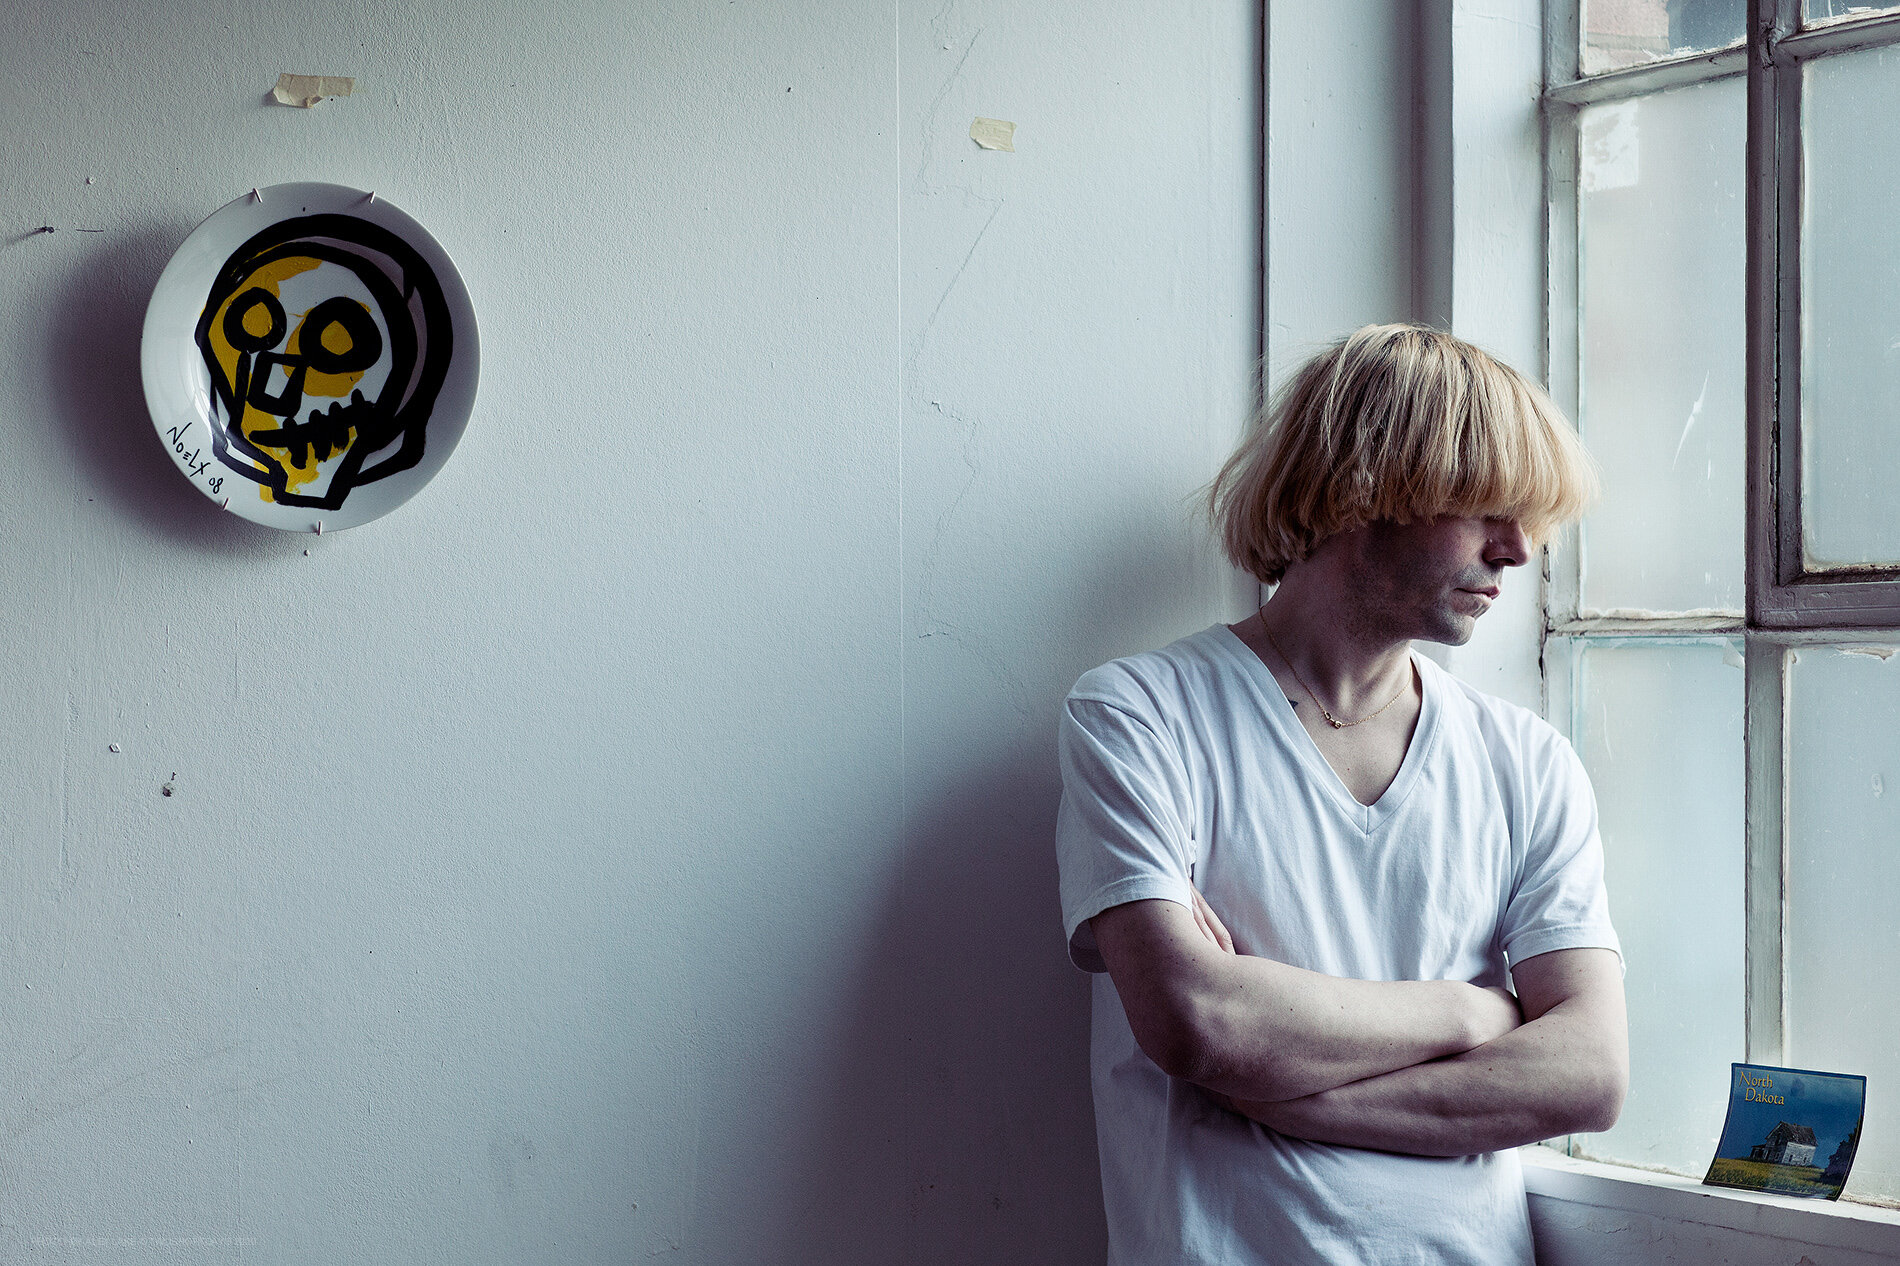 tim_burgess_photography_copyright_ALEX_LAKE_do_not_reproduce_without_permission_TWOSHORTDAYS.jpg